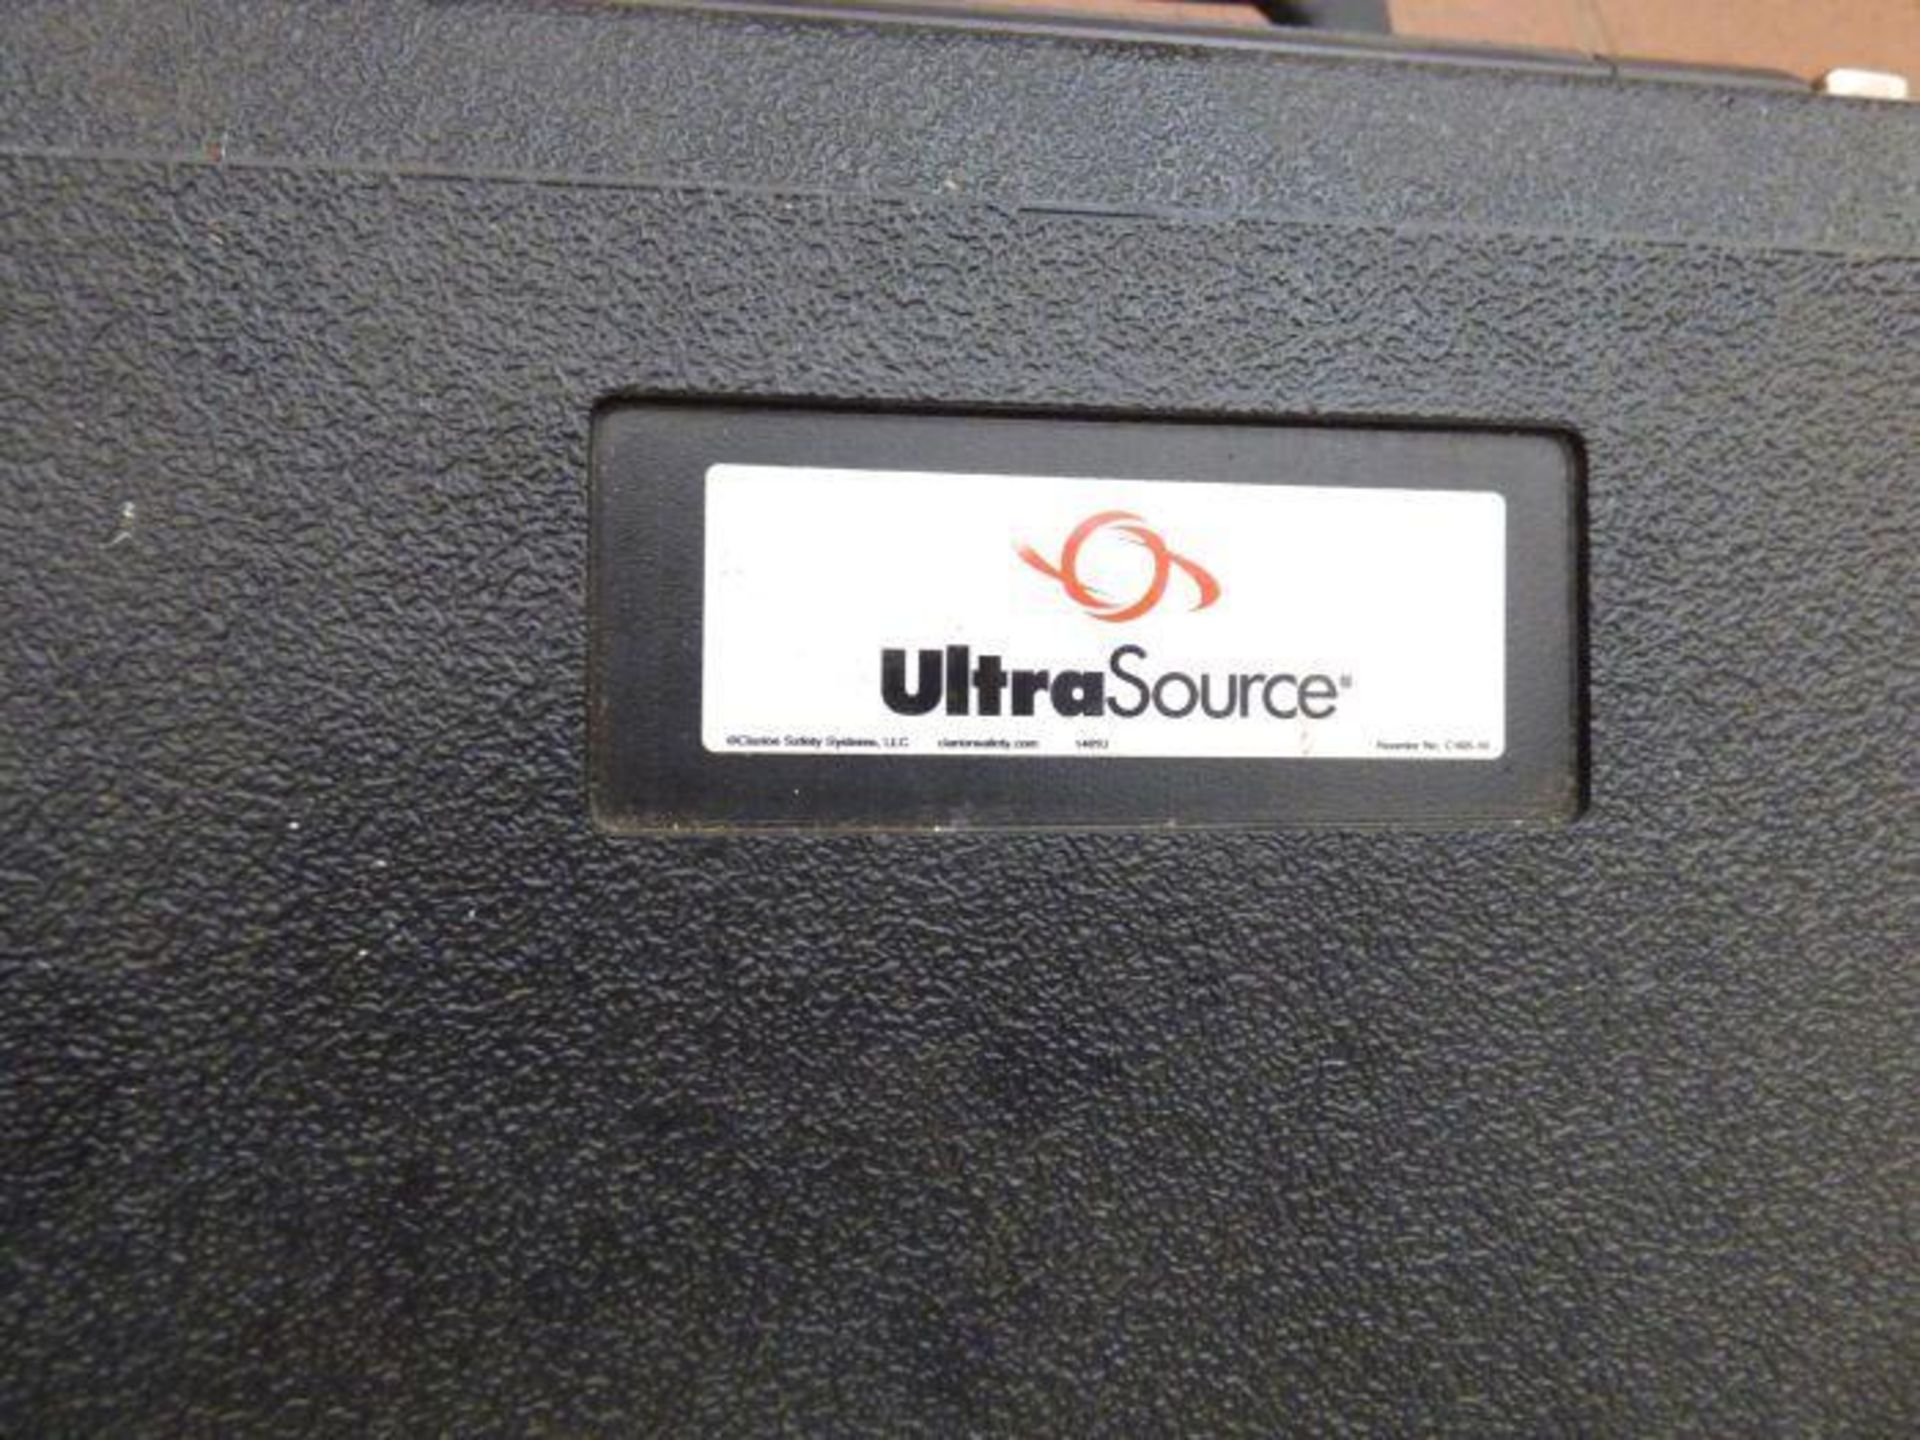 2015 Rhino Ultrasource Tray Sealing Machine with Spare Parts - Image 8 of 22